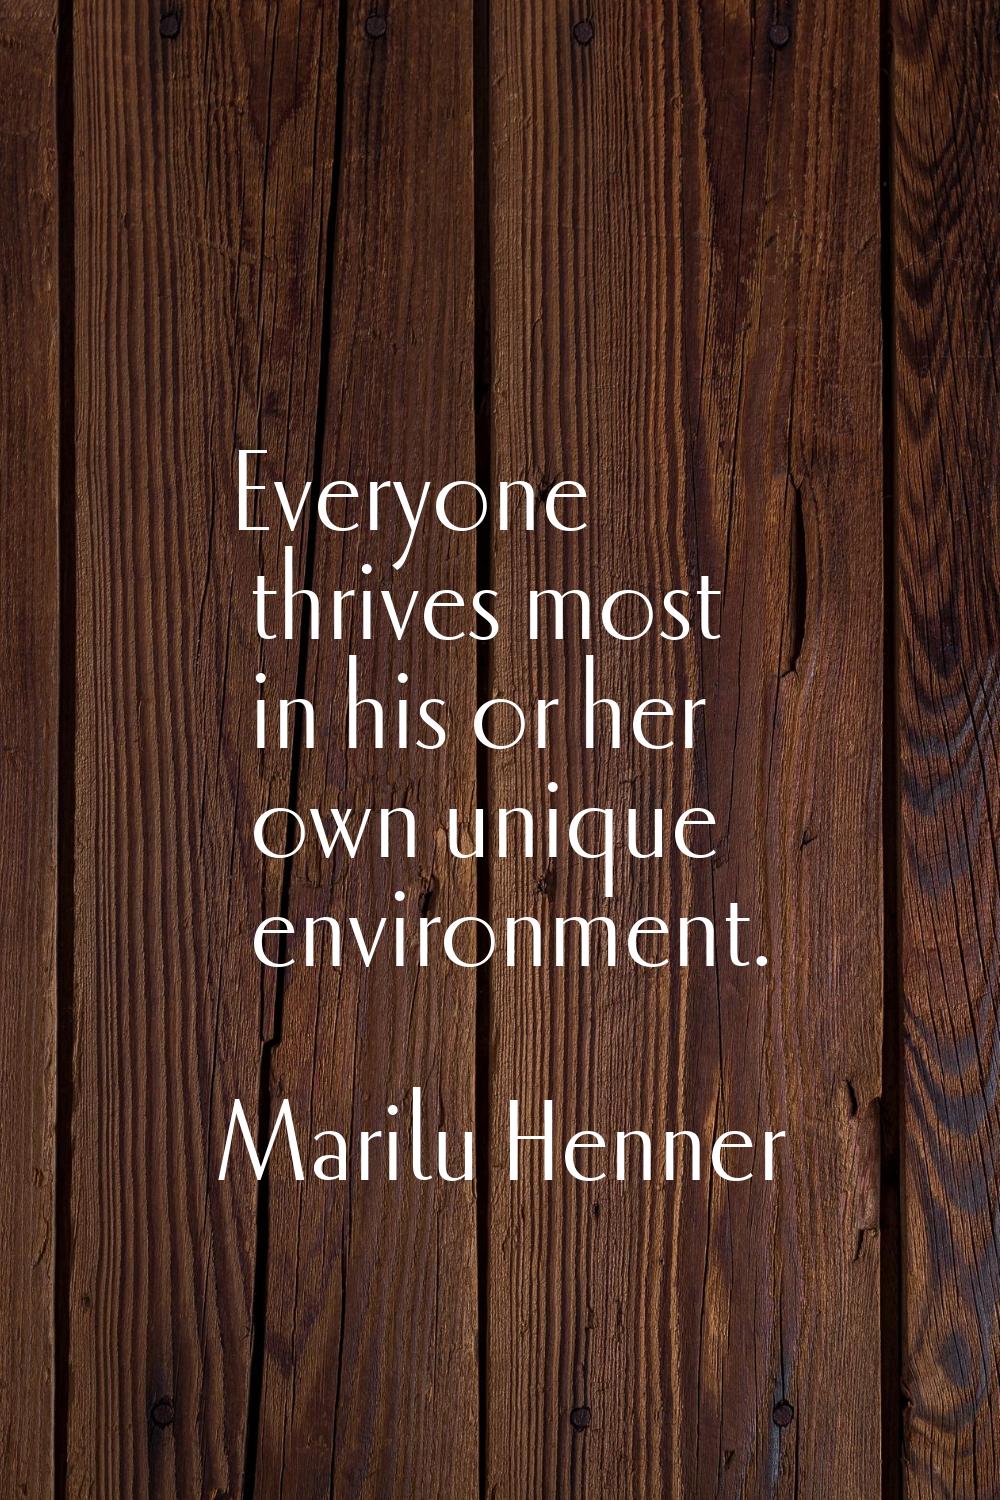 Everyone thrives most in his or her own unique environment.